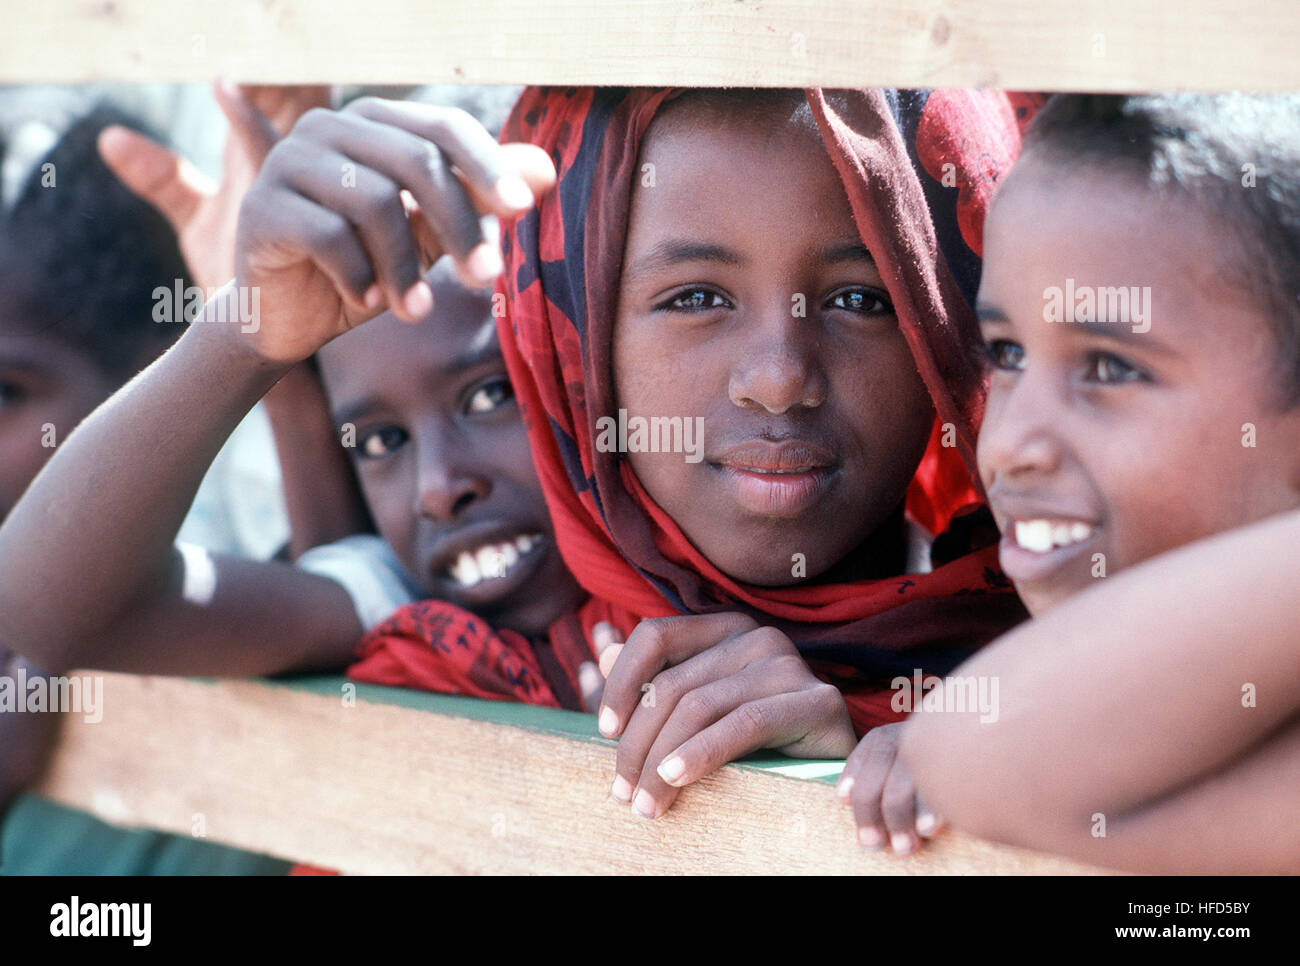 Somali children watch members of Naval Mobile Construction Battalion 1 (NMCB-1) as they work to improve a local school during the multinational relief effort OPERATION RESTORE HOPE. Somali children Stock Photo